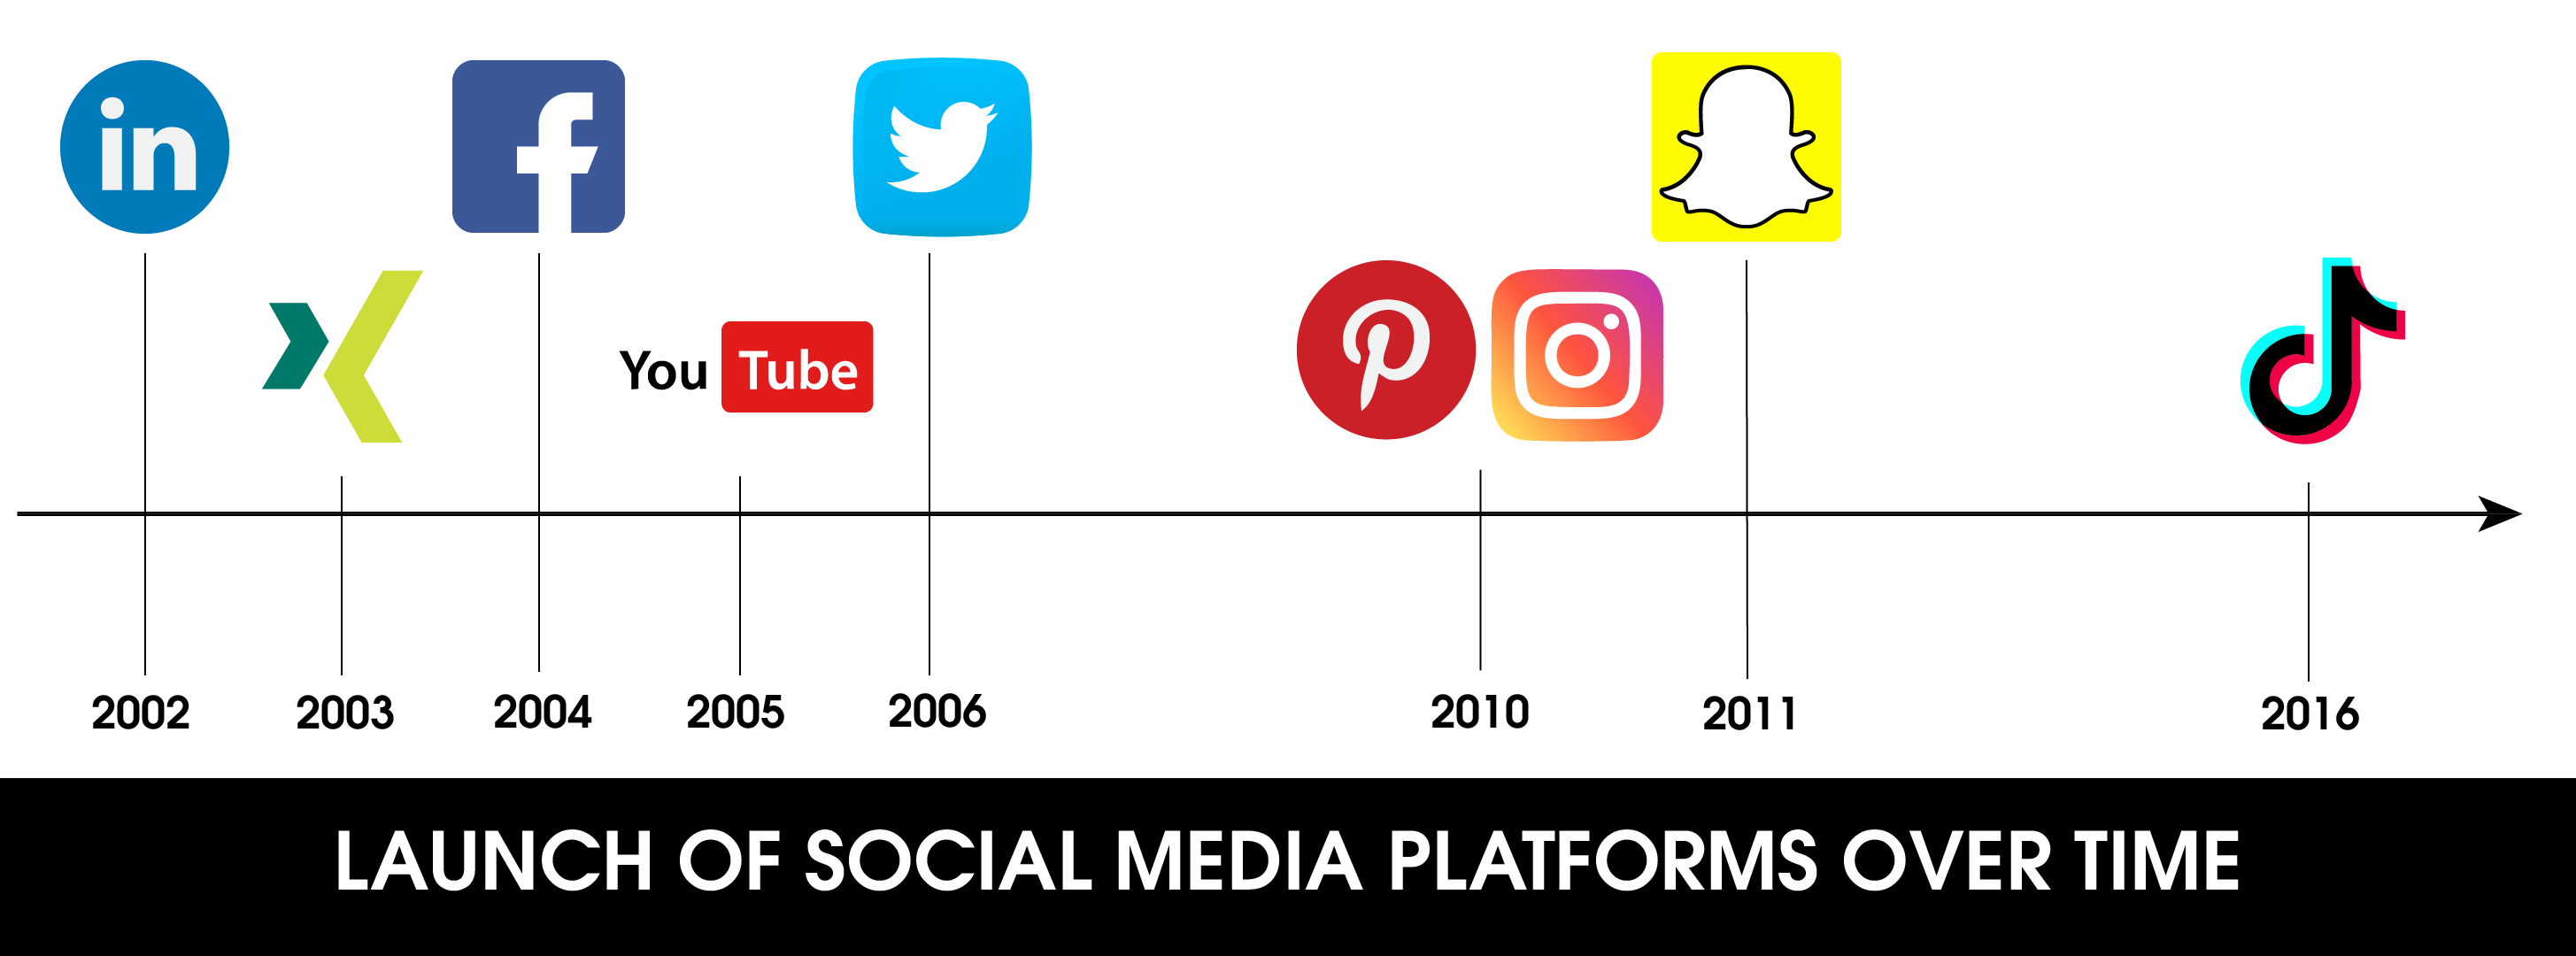 The chart shows the development of the individual social media platforms over time. Here you can see the most popular social media platforms and when they were launched.